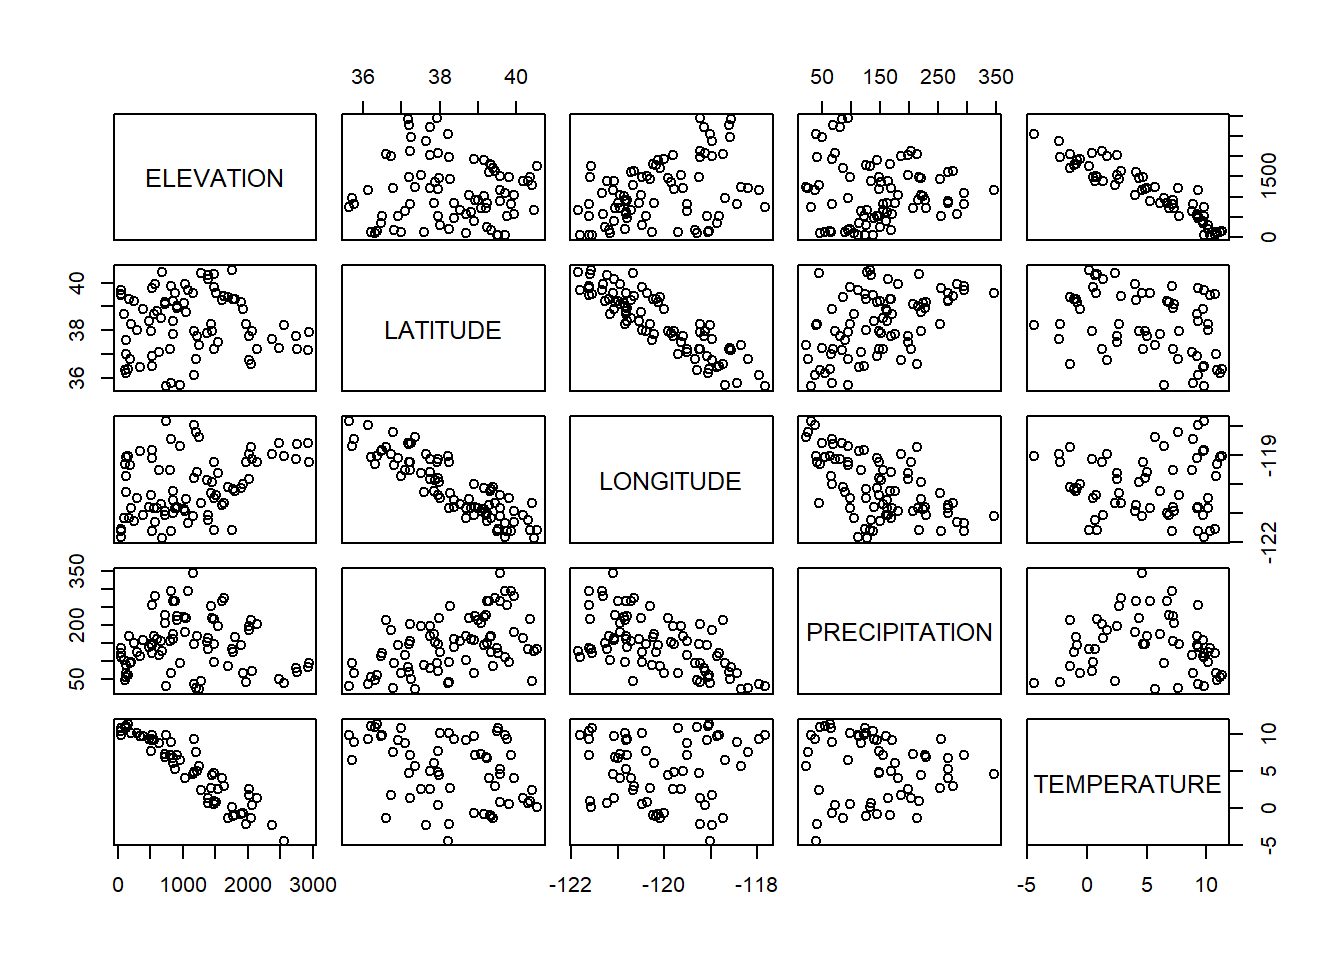 Pairs plot for Sierra Nevada stations variables